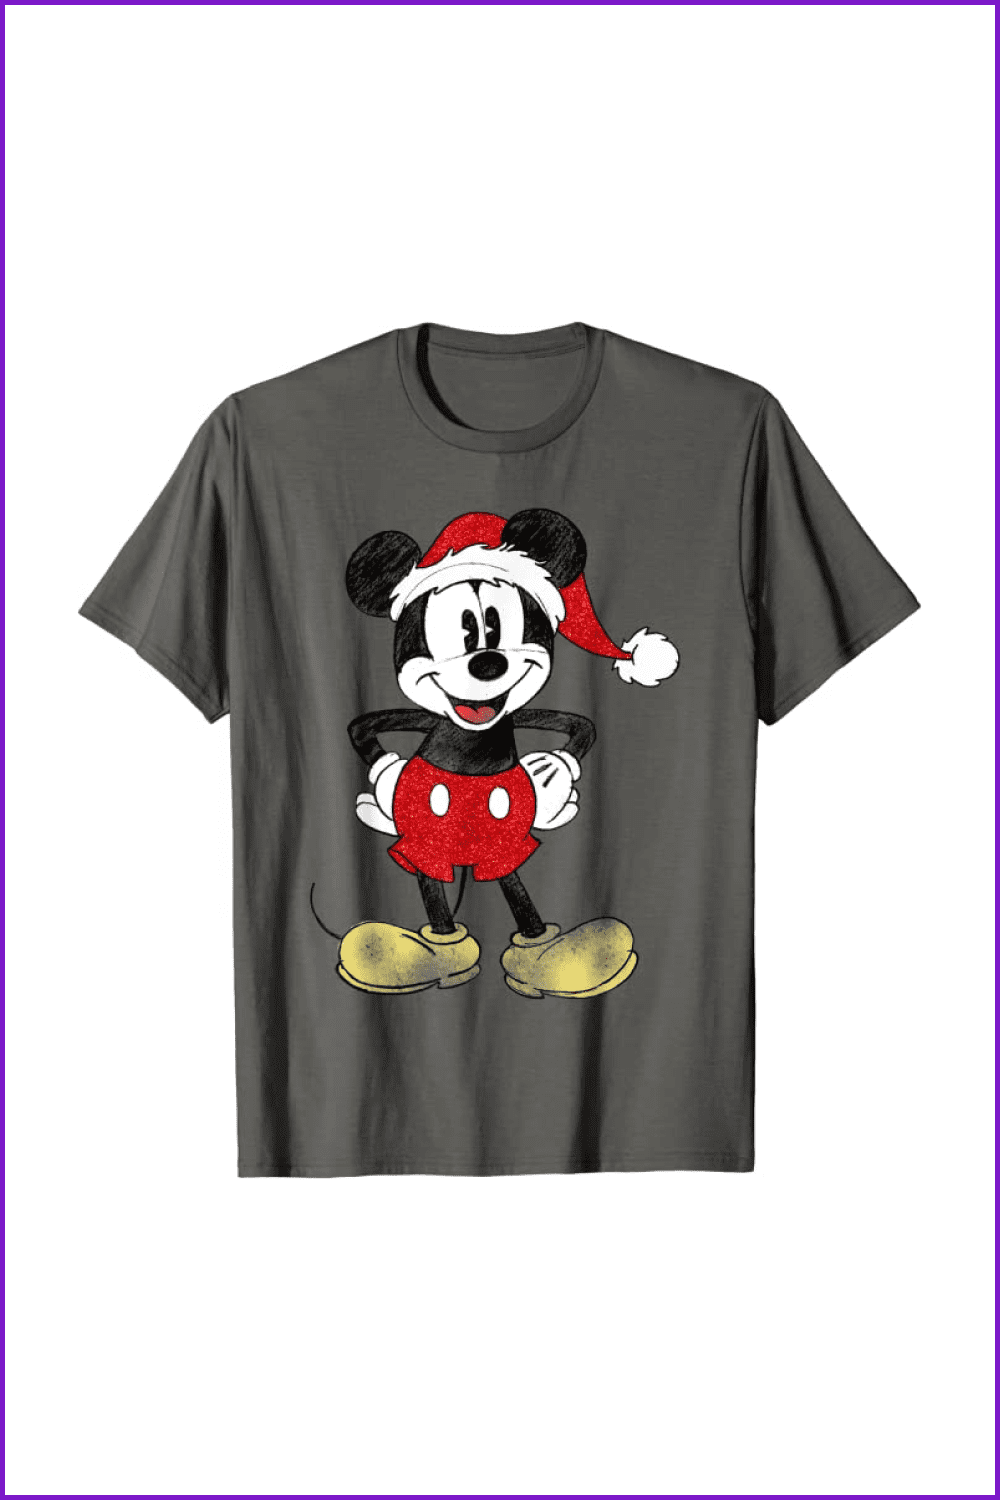 Grey t-shirt with a smiling Mickey Mouse in a red Christmas hat.